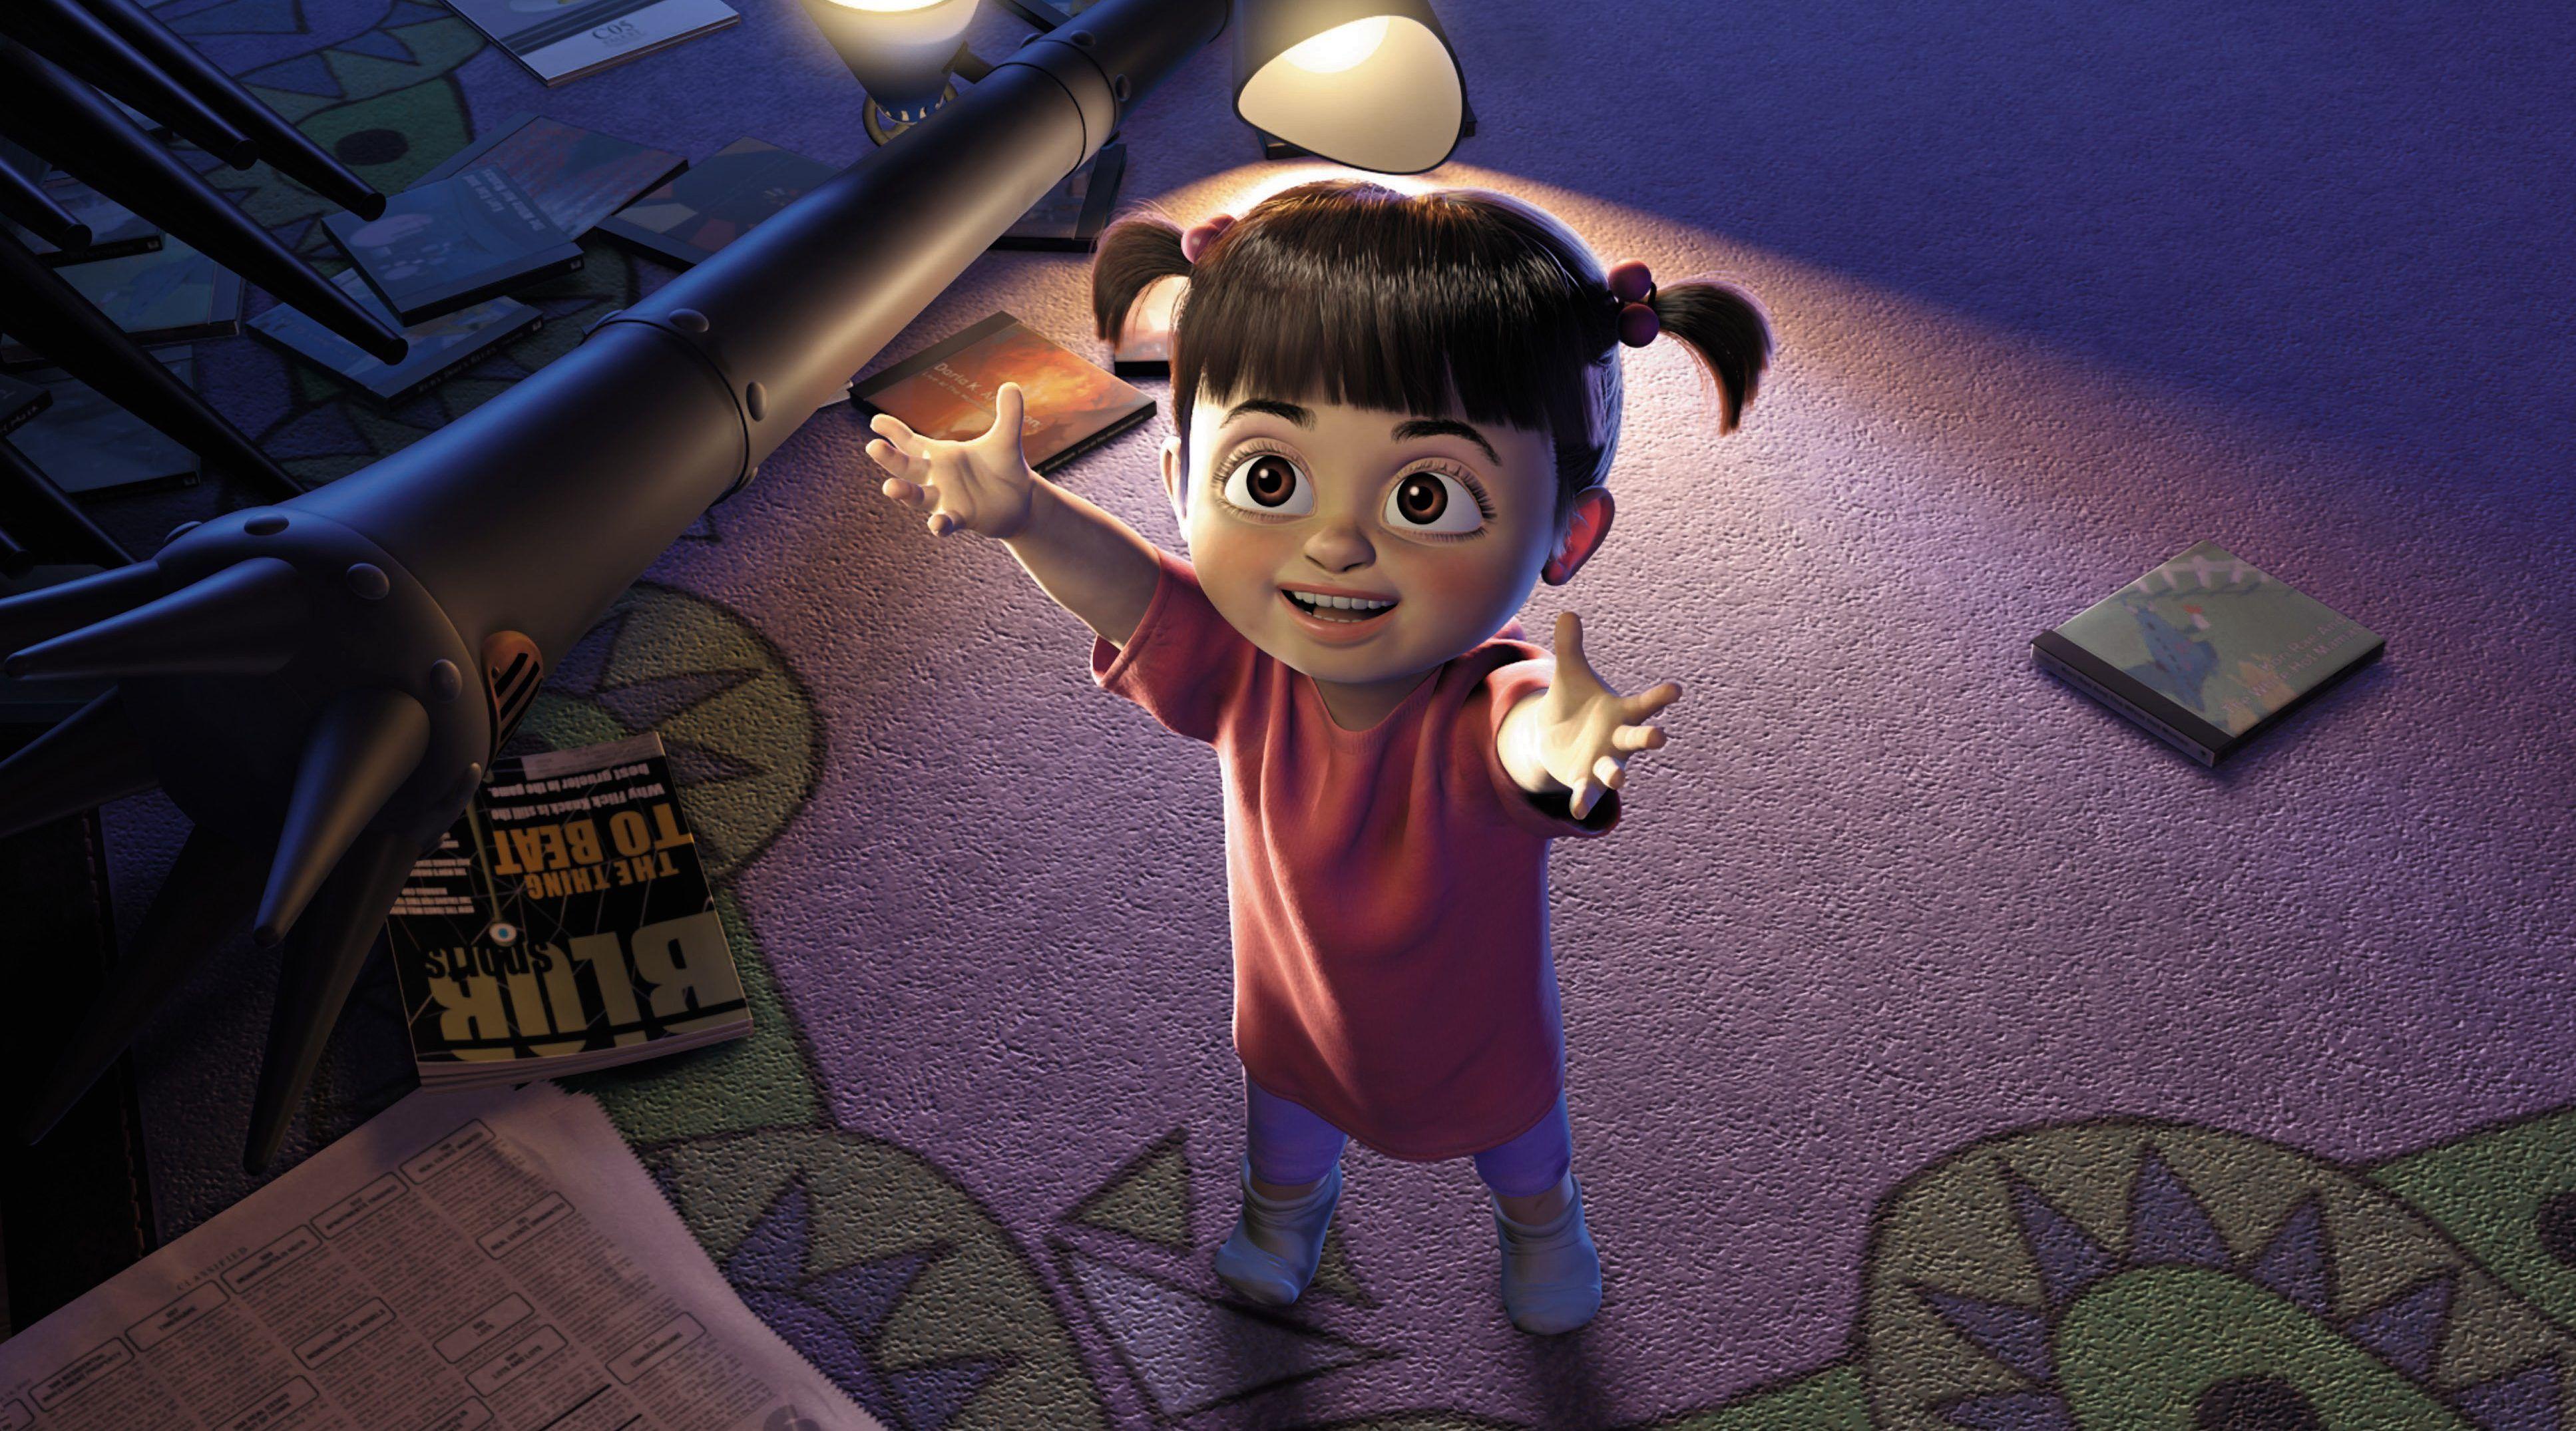 Boo Monsters Inc. Logo - Monsters Inc 3 could feature original character Boo as an adult ...